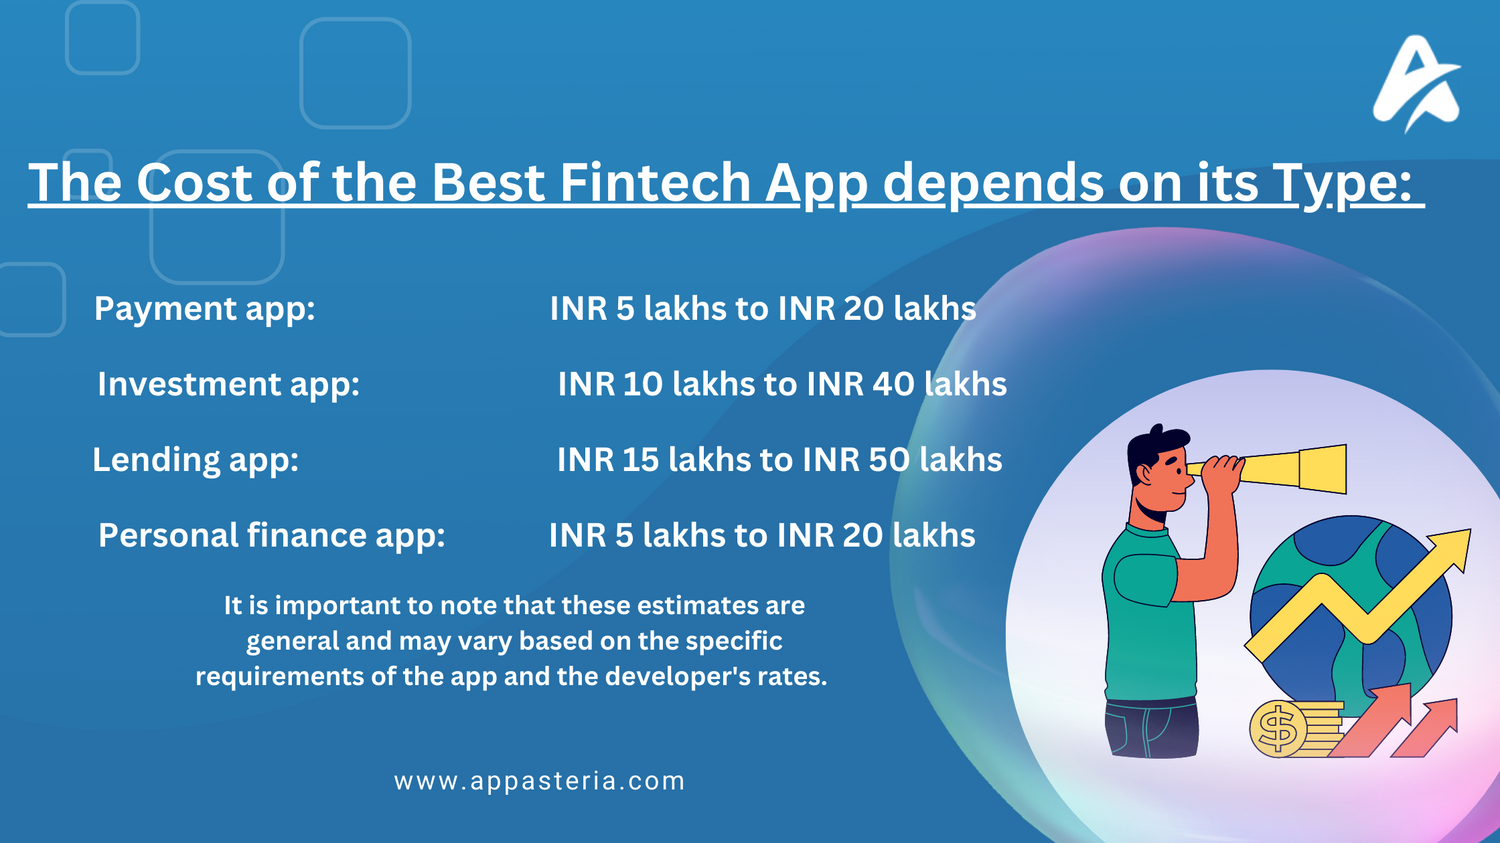 Cost of te Fintech App Depends on its Types